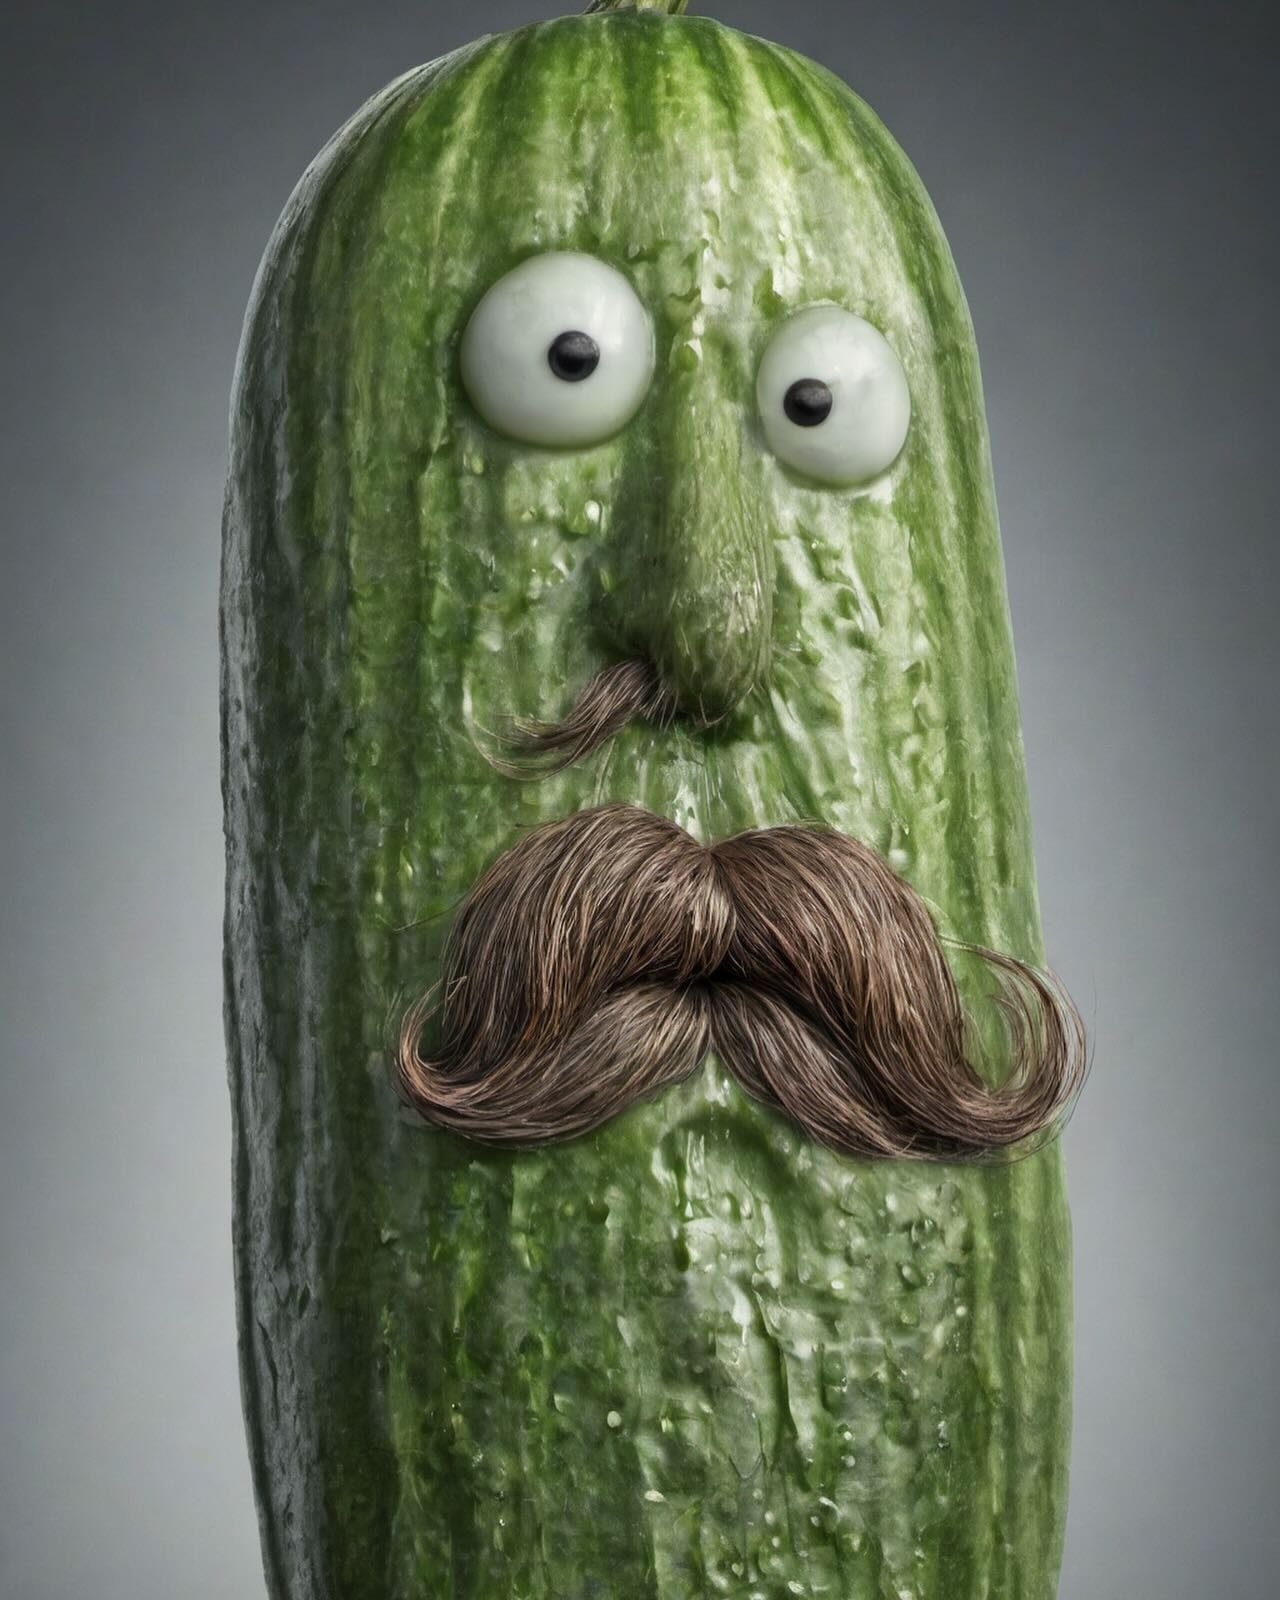 Try to do something beautiful with the mustache 🥸

#aiartist #socialmedia #artdirection #prompt #promptart #notmidjourney #ThePickle #cucumber